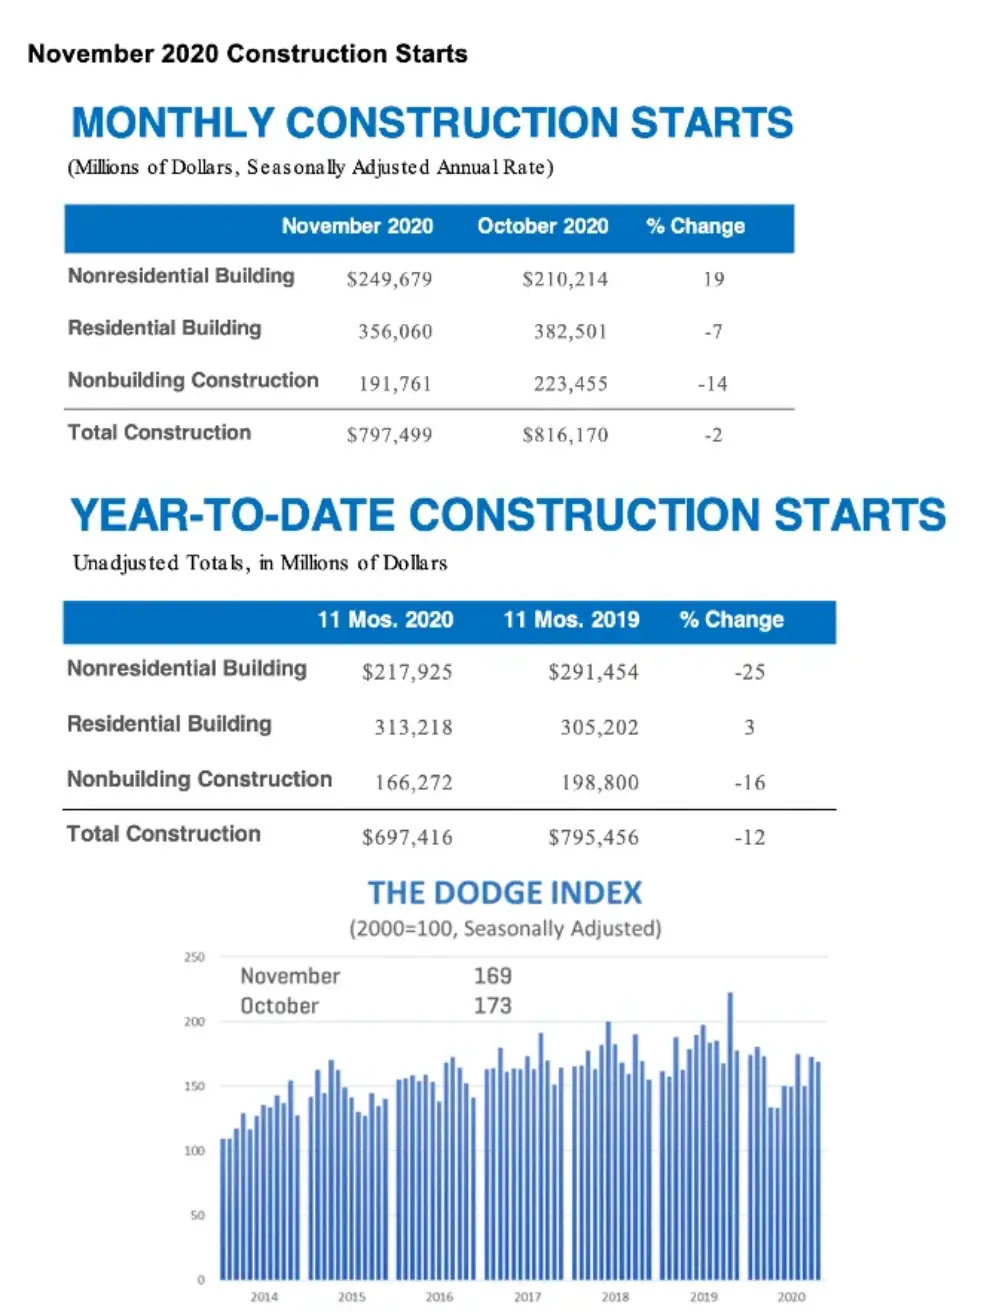 Dodge Data: Construction Starts See Mixed Month in November